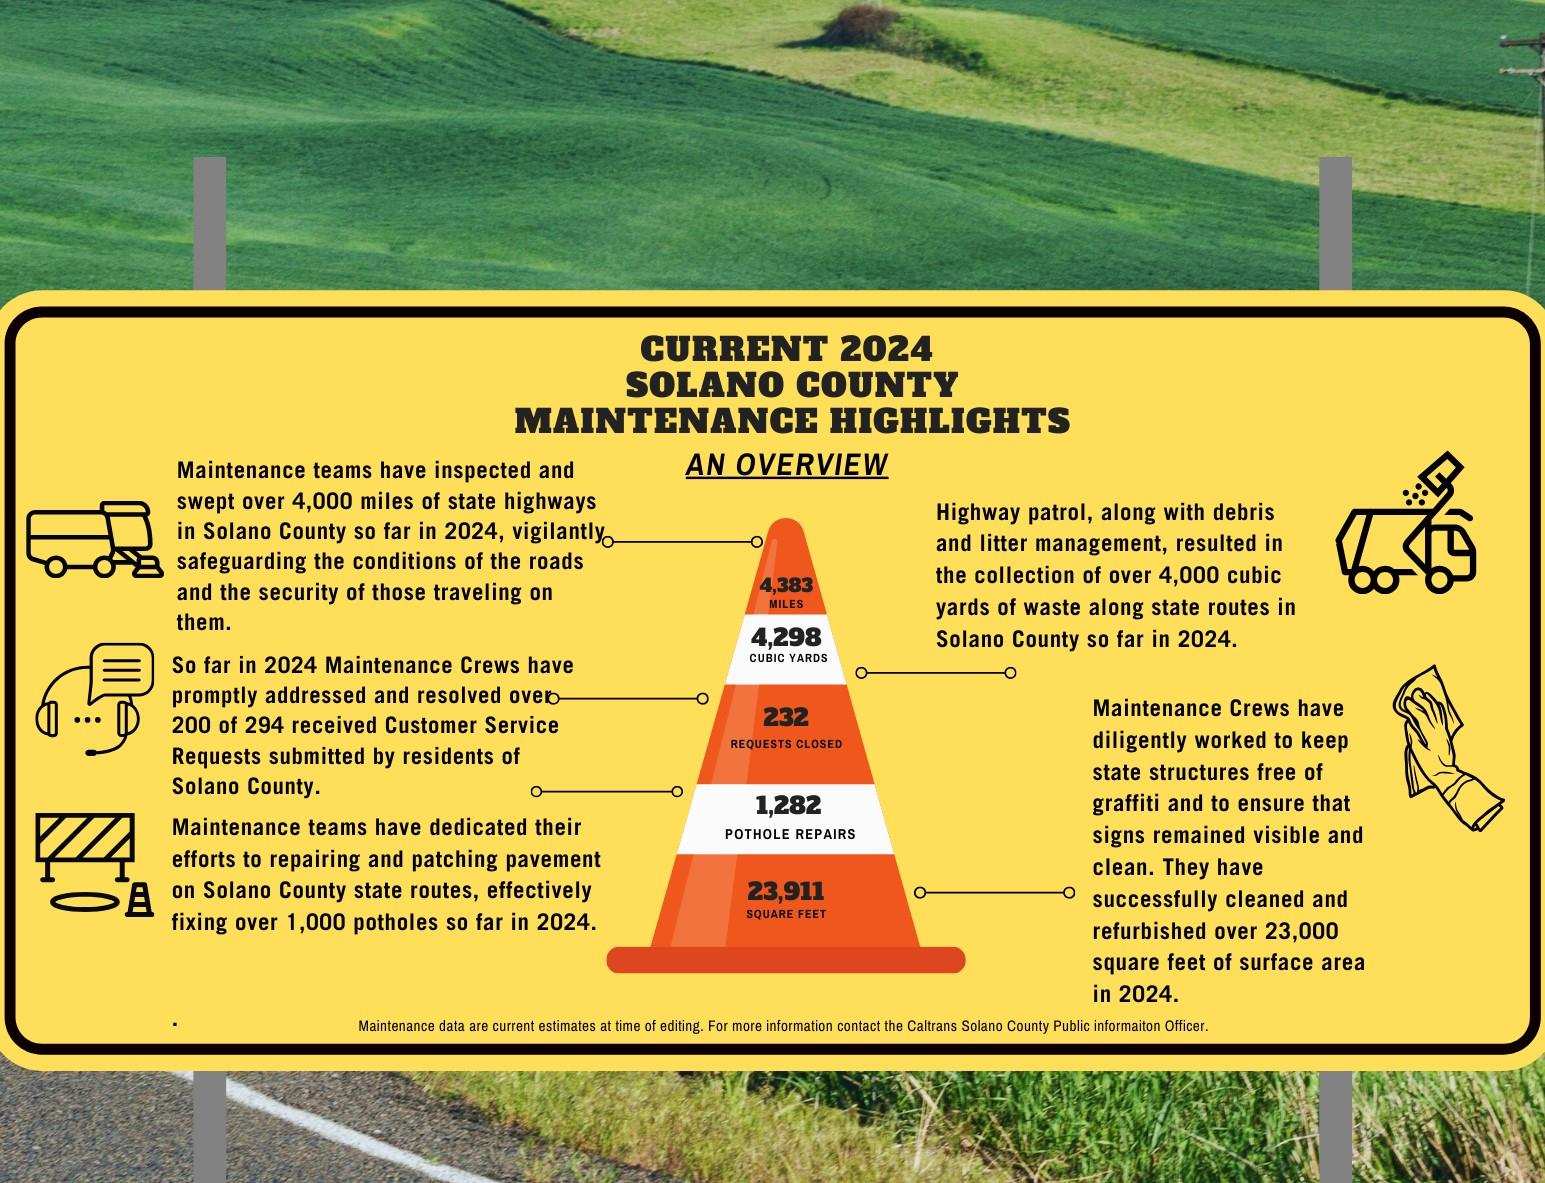 Current 2024 Solano County Maintenance Highlights Information Graphic